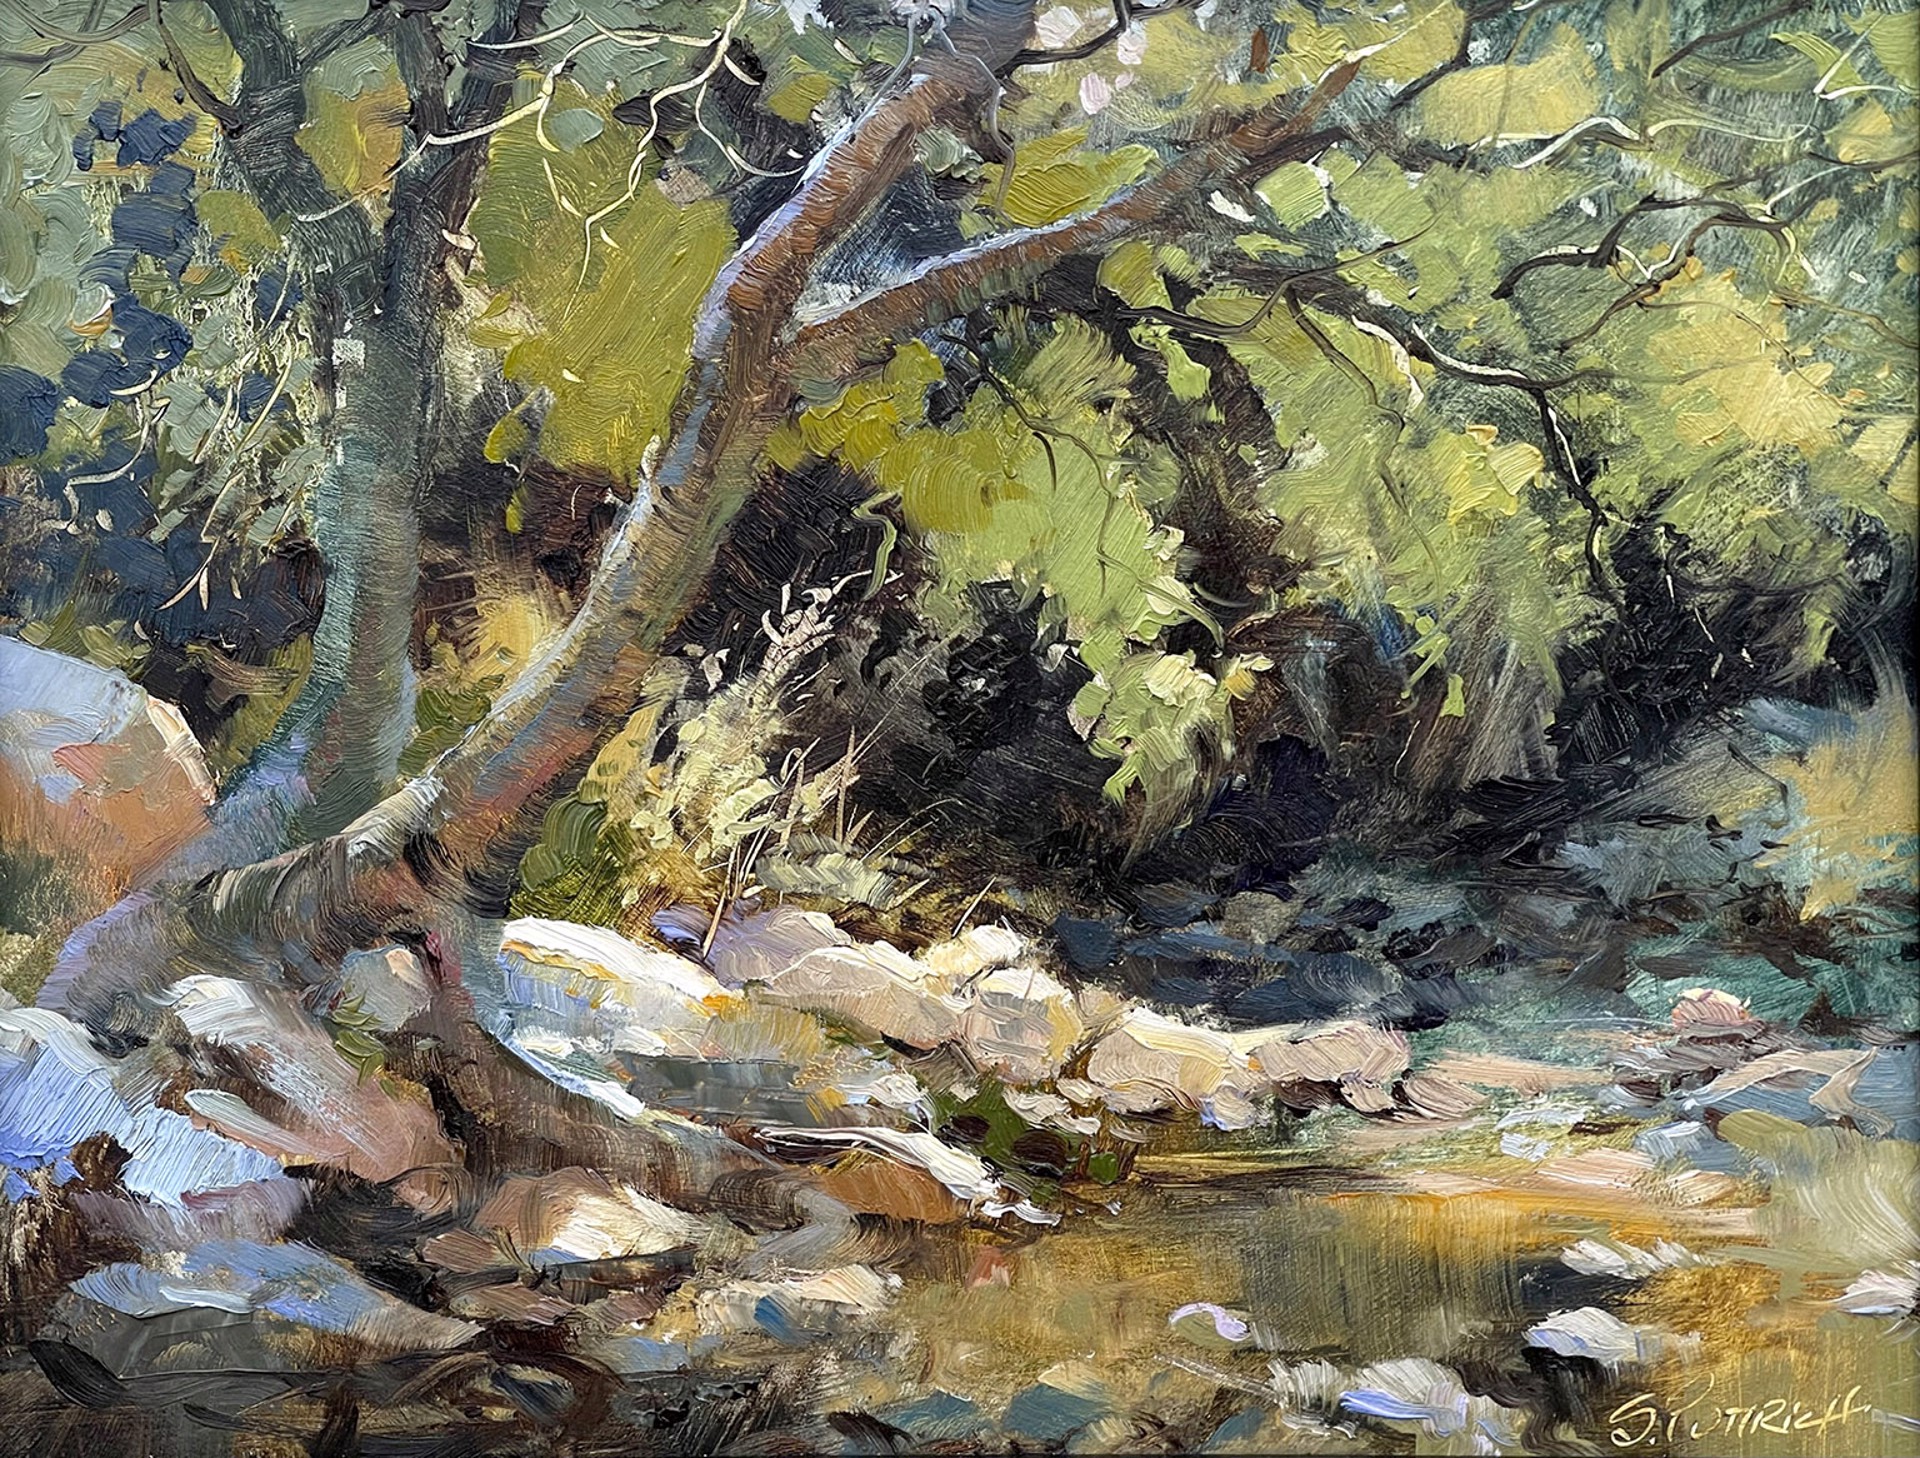 Stephen John Puttrich "Placerita Canyon" by Oil Painters of America